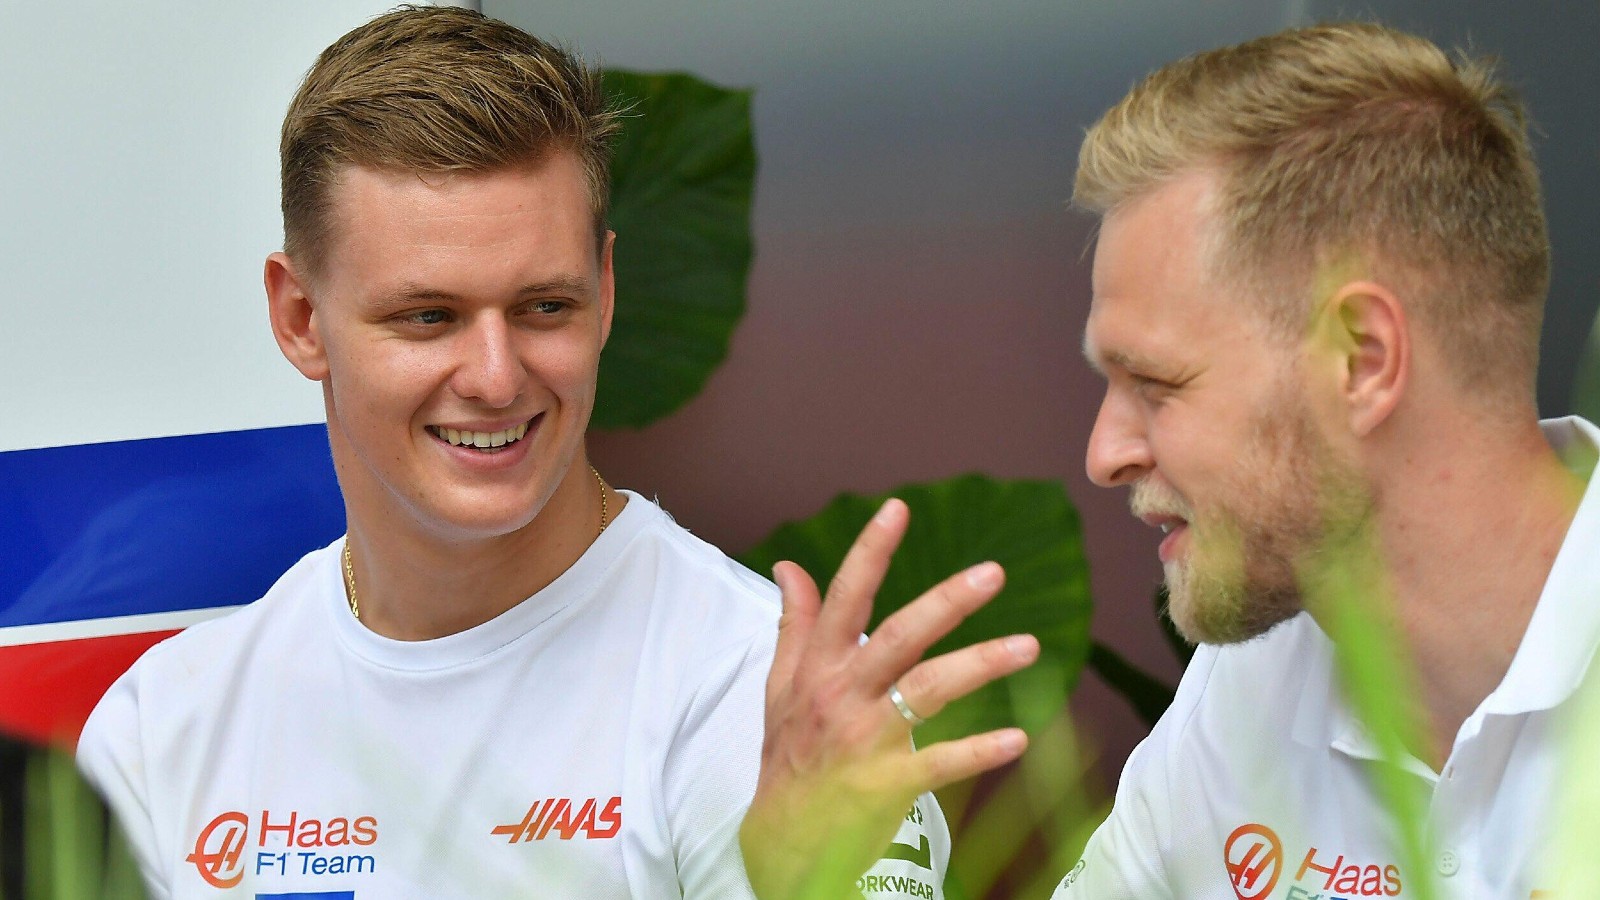 Kevin Magnussen and Mick Schumacher, Haas, talk in Miami. United States, May 2022.